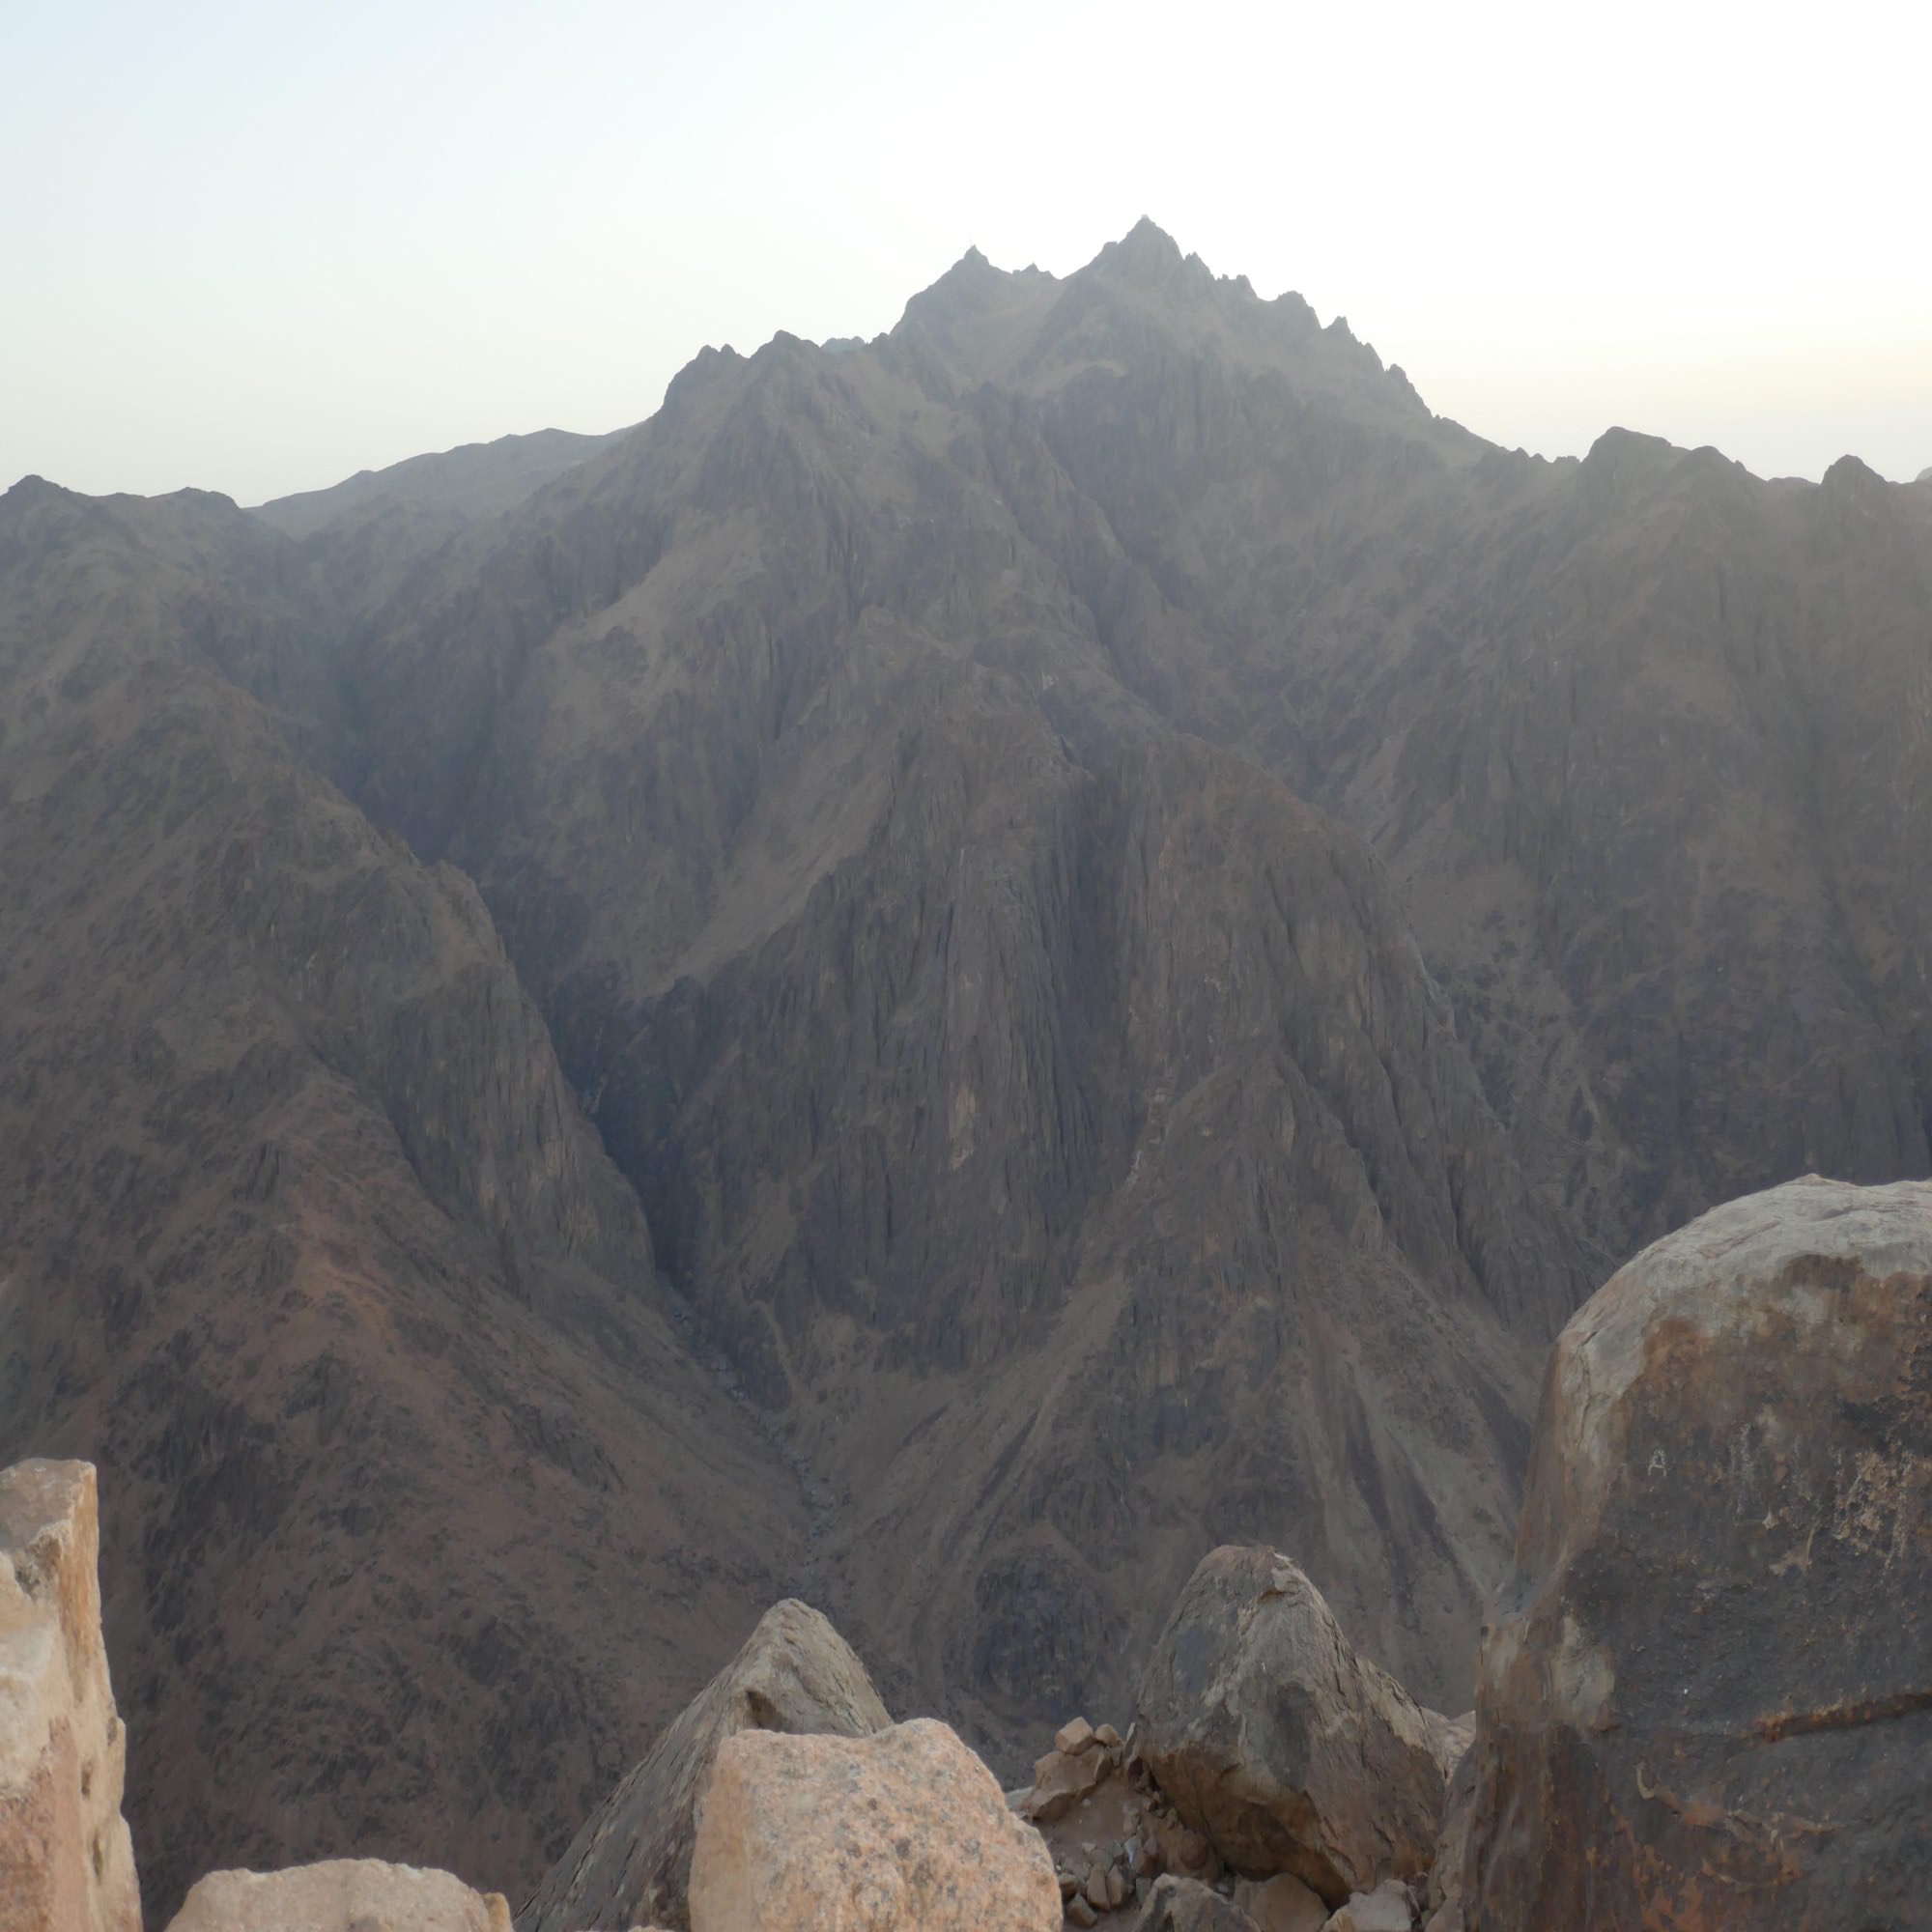 Mt Caterina from Mt Sinai